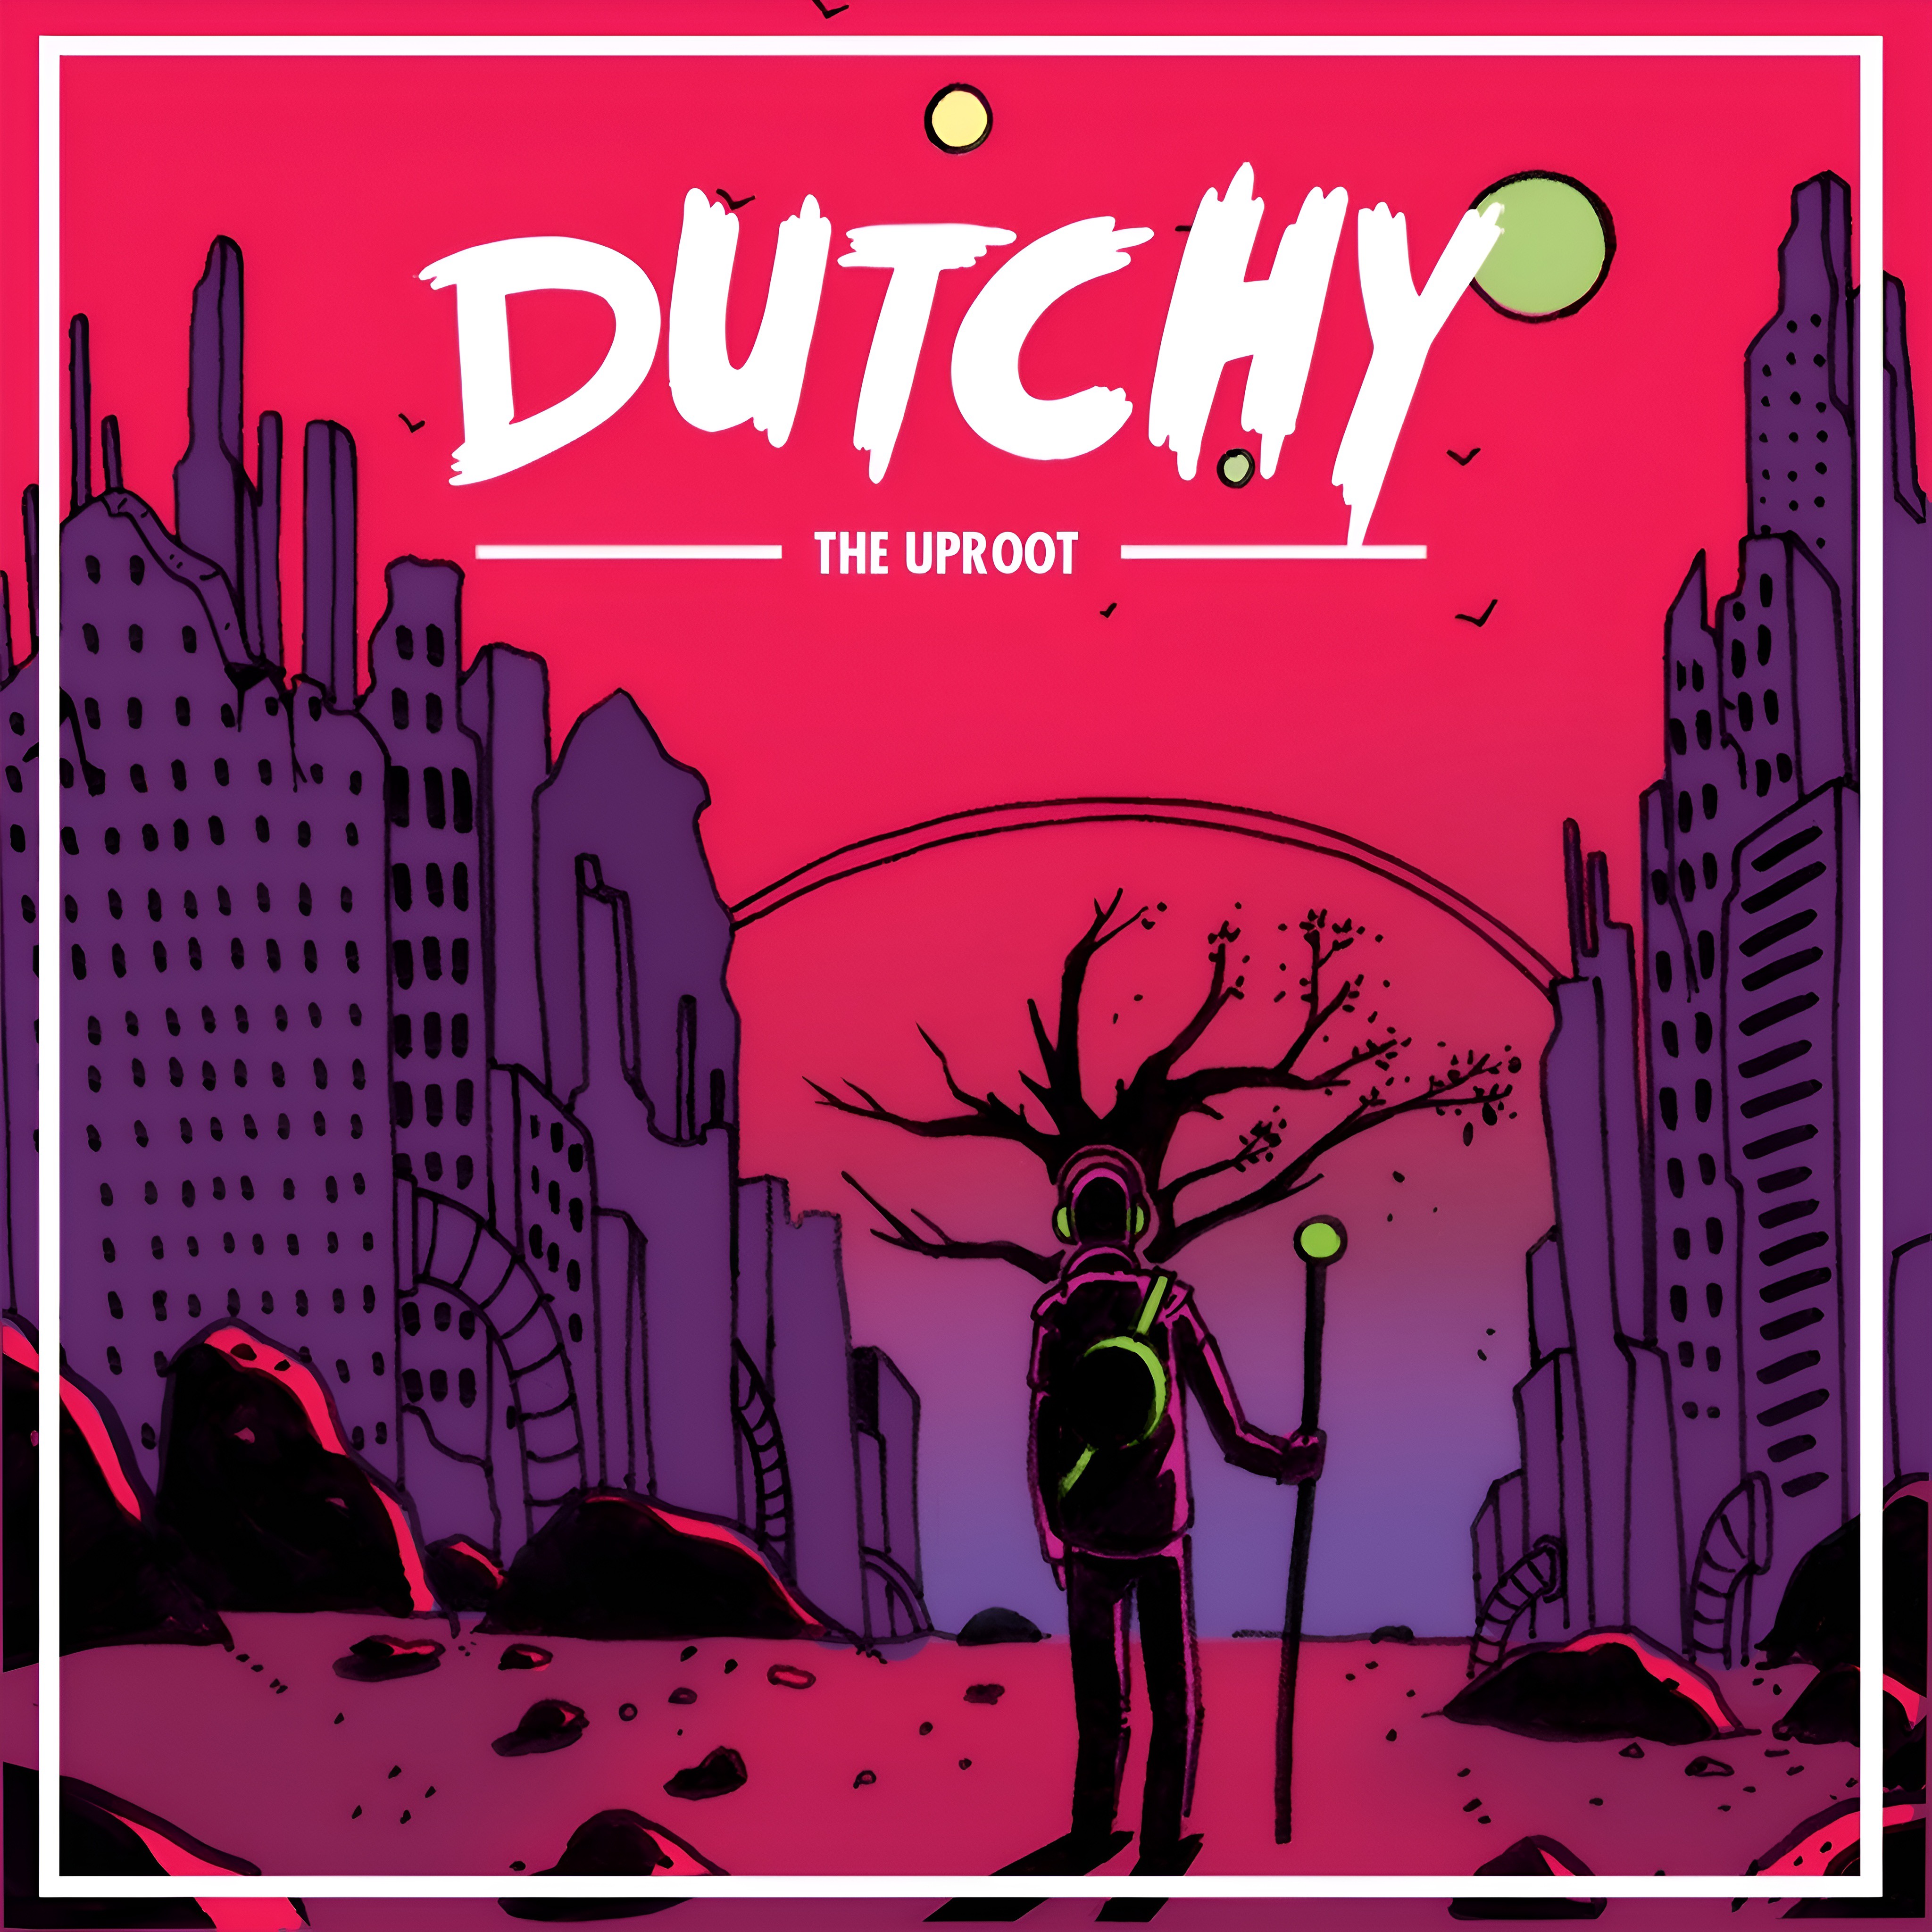 Dutchyyy - "The Uproot" (Side A)  [Demo Version]